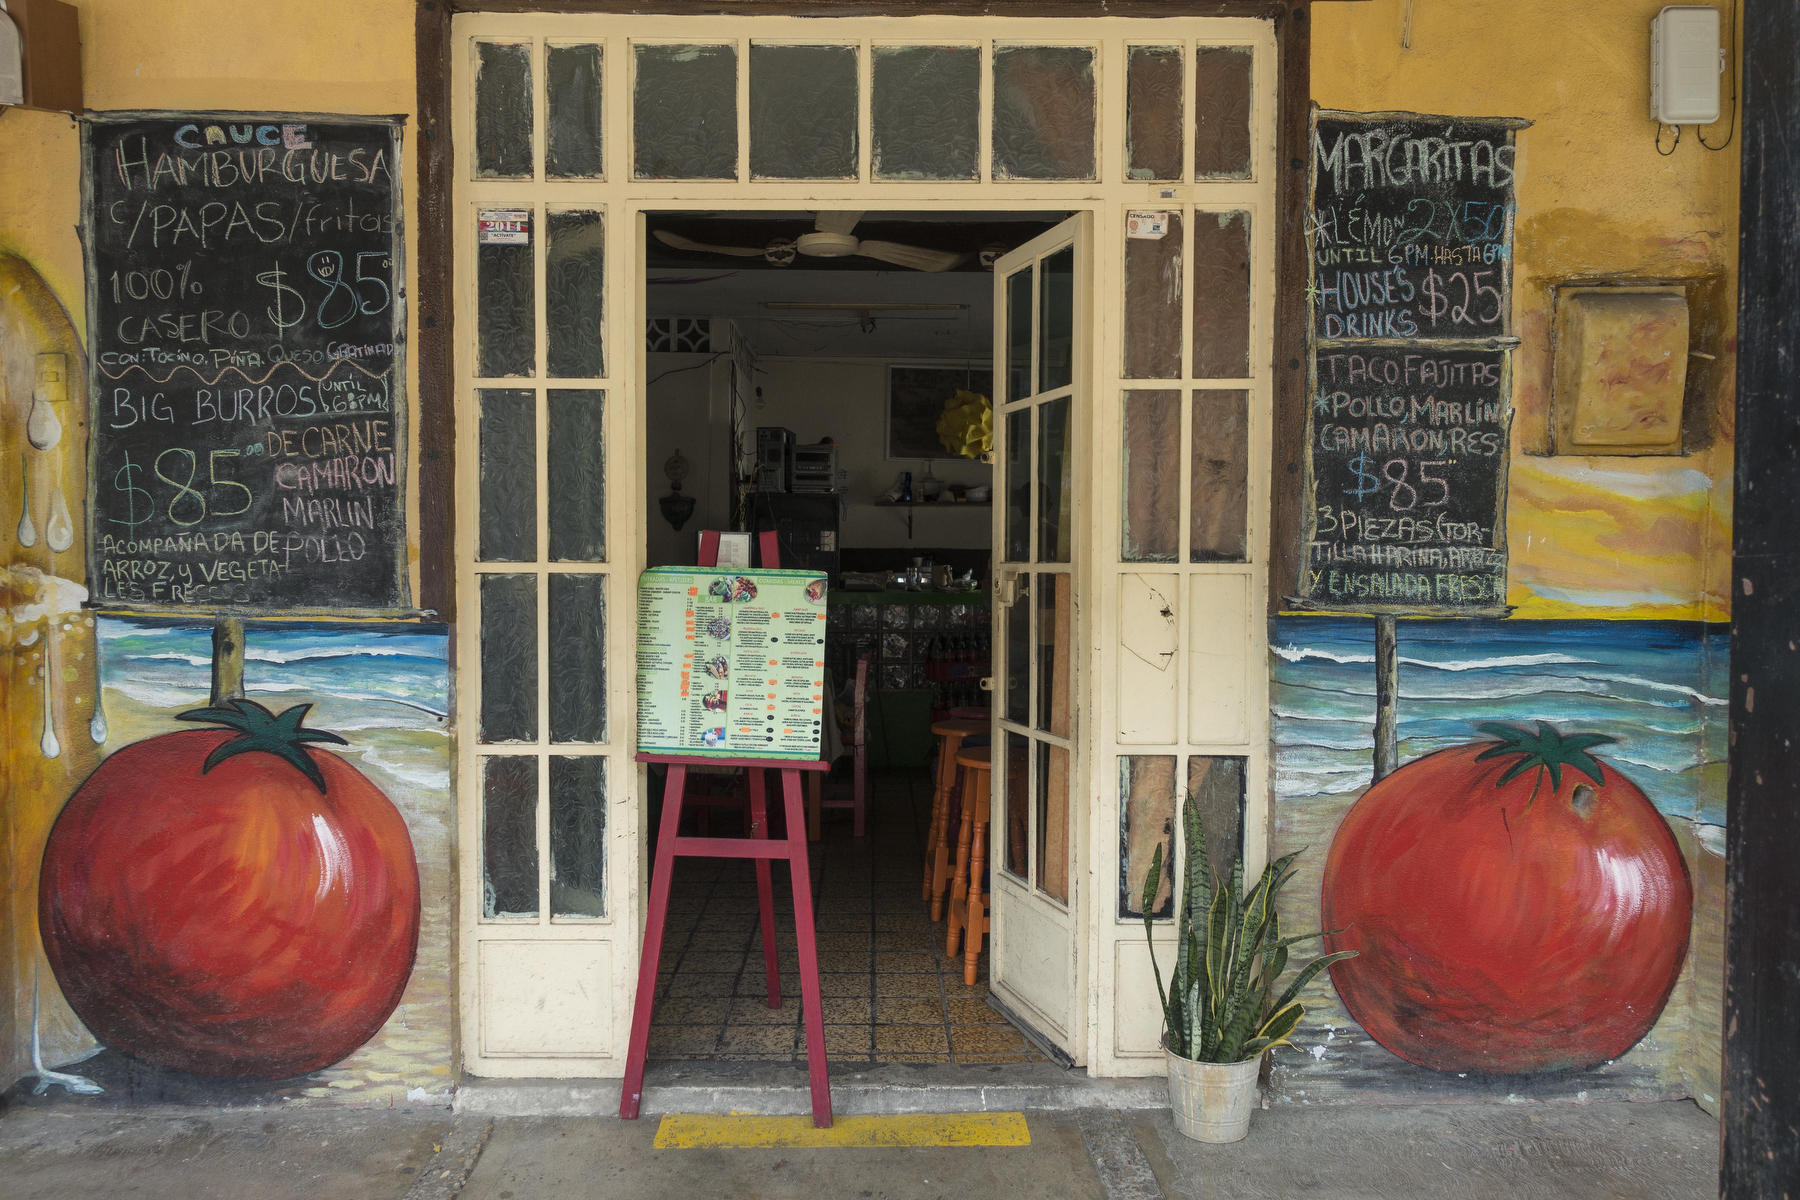 Cauce restaurant in Old Town features giant painted tomatoes on each side of the entrance door. : PUERTO VALLARTA - Wall Art & Bicycle Tour : Viviane Moos |  Documentary Photographer